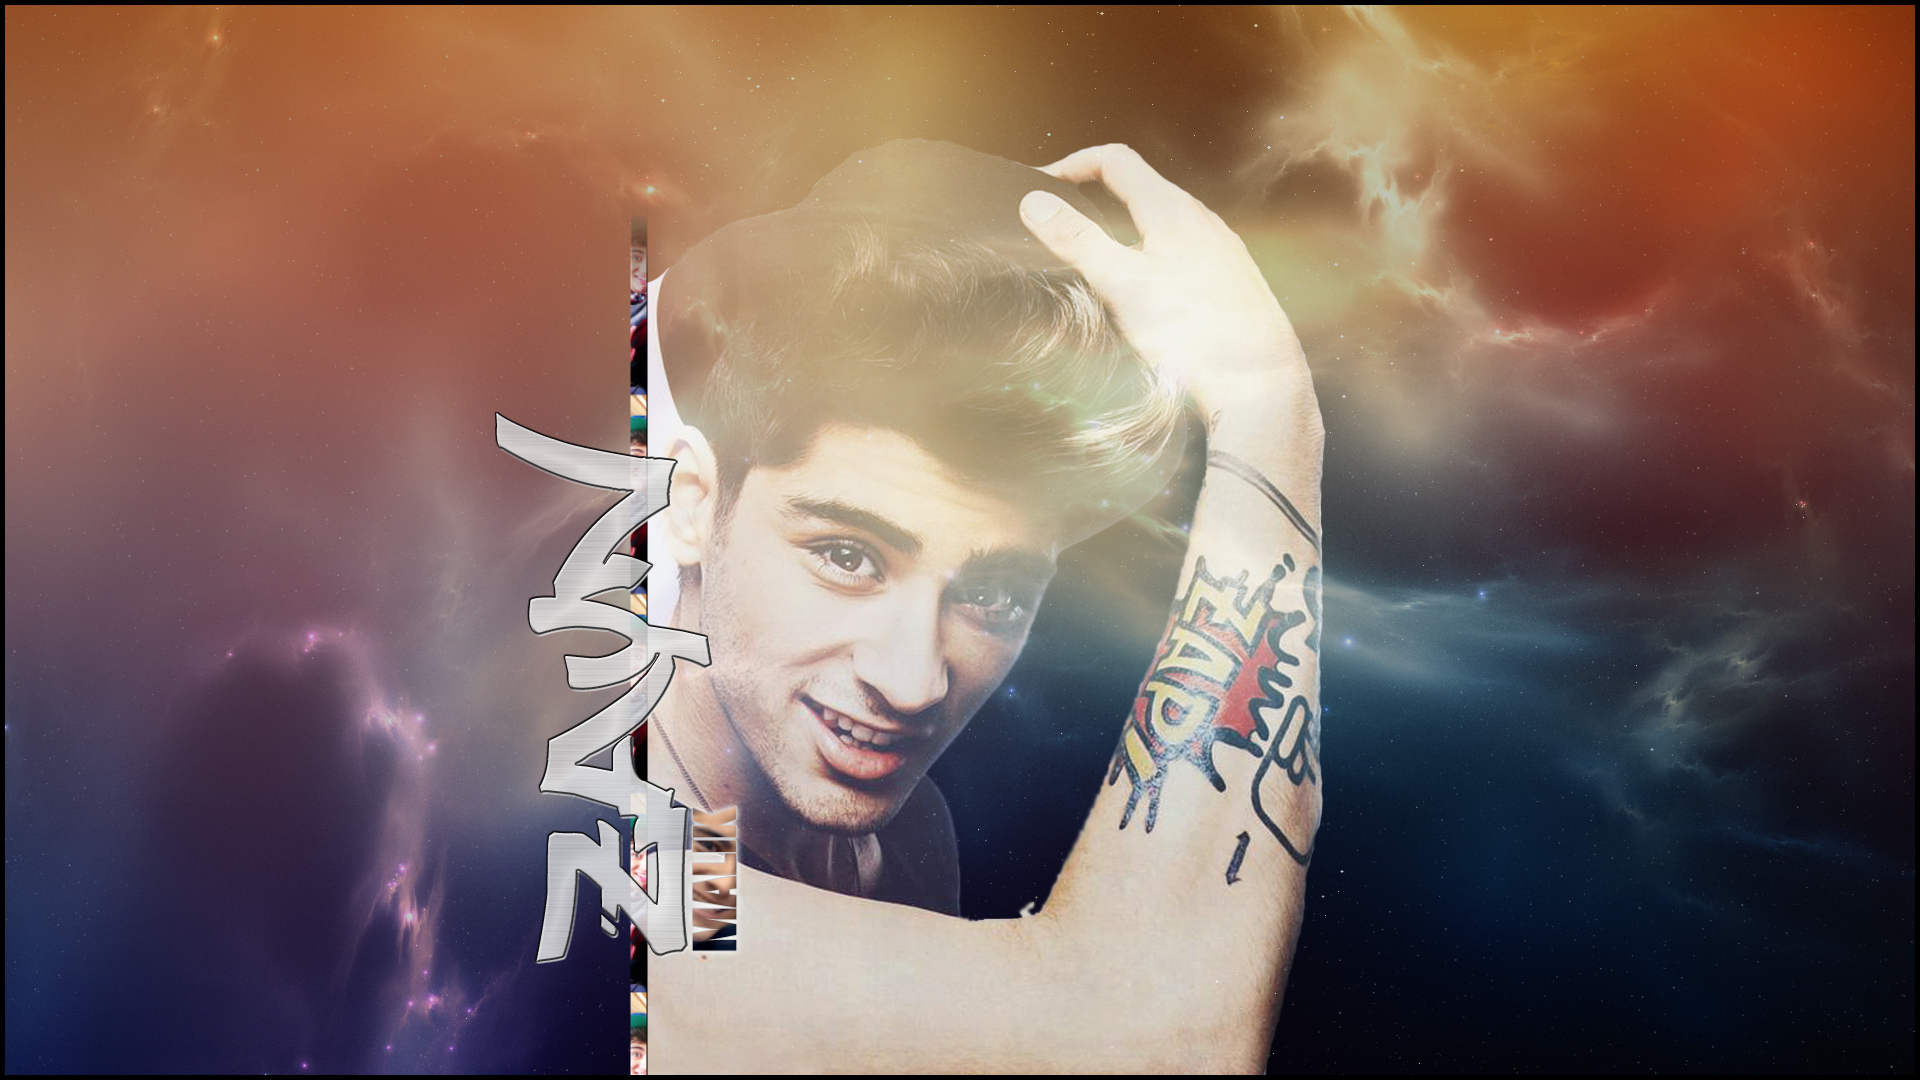 Zayn Malik Wallpapers Pictures Images